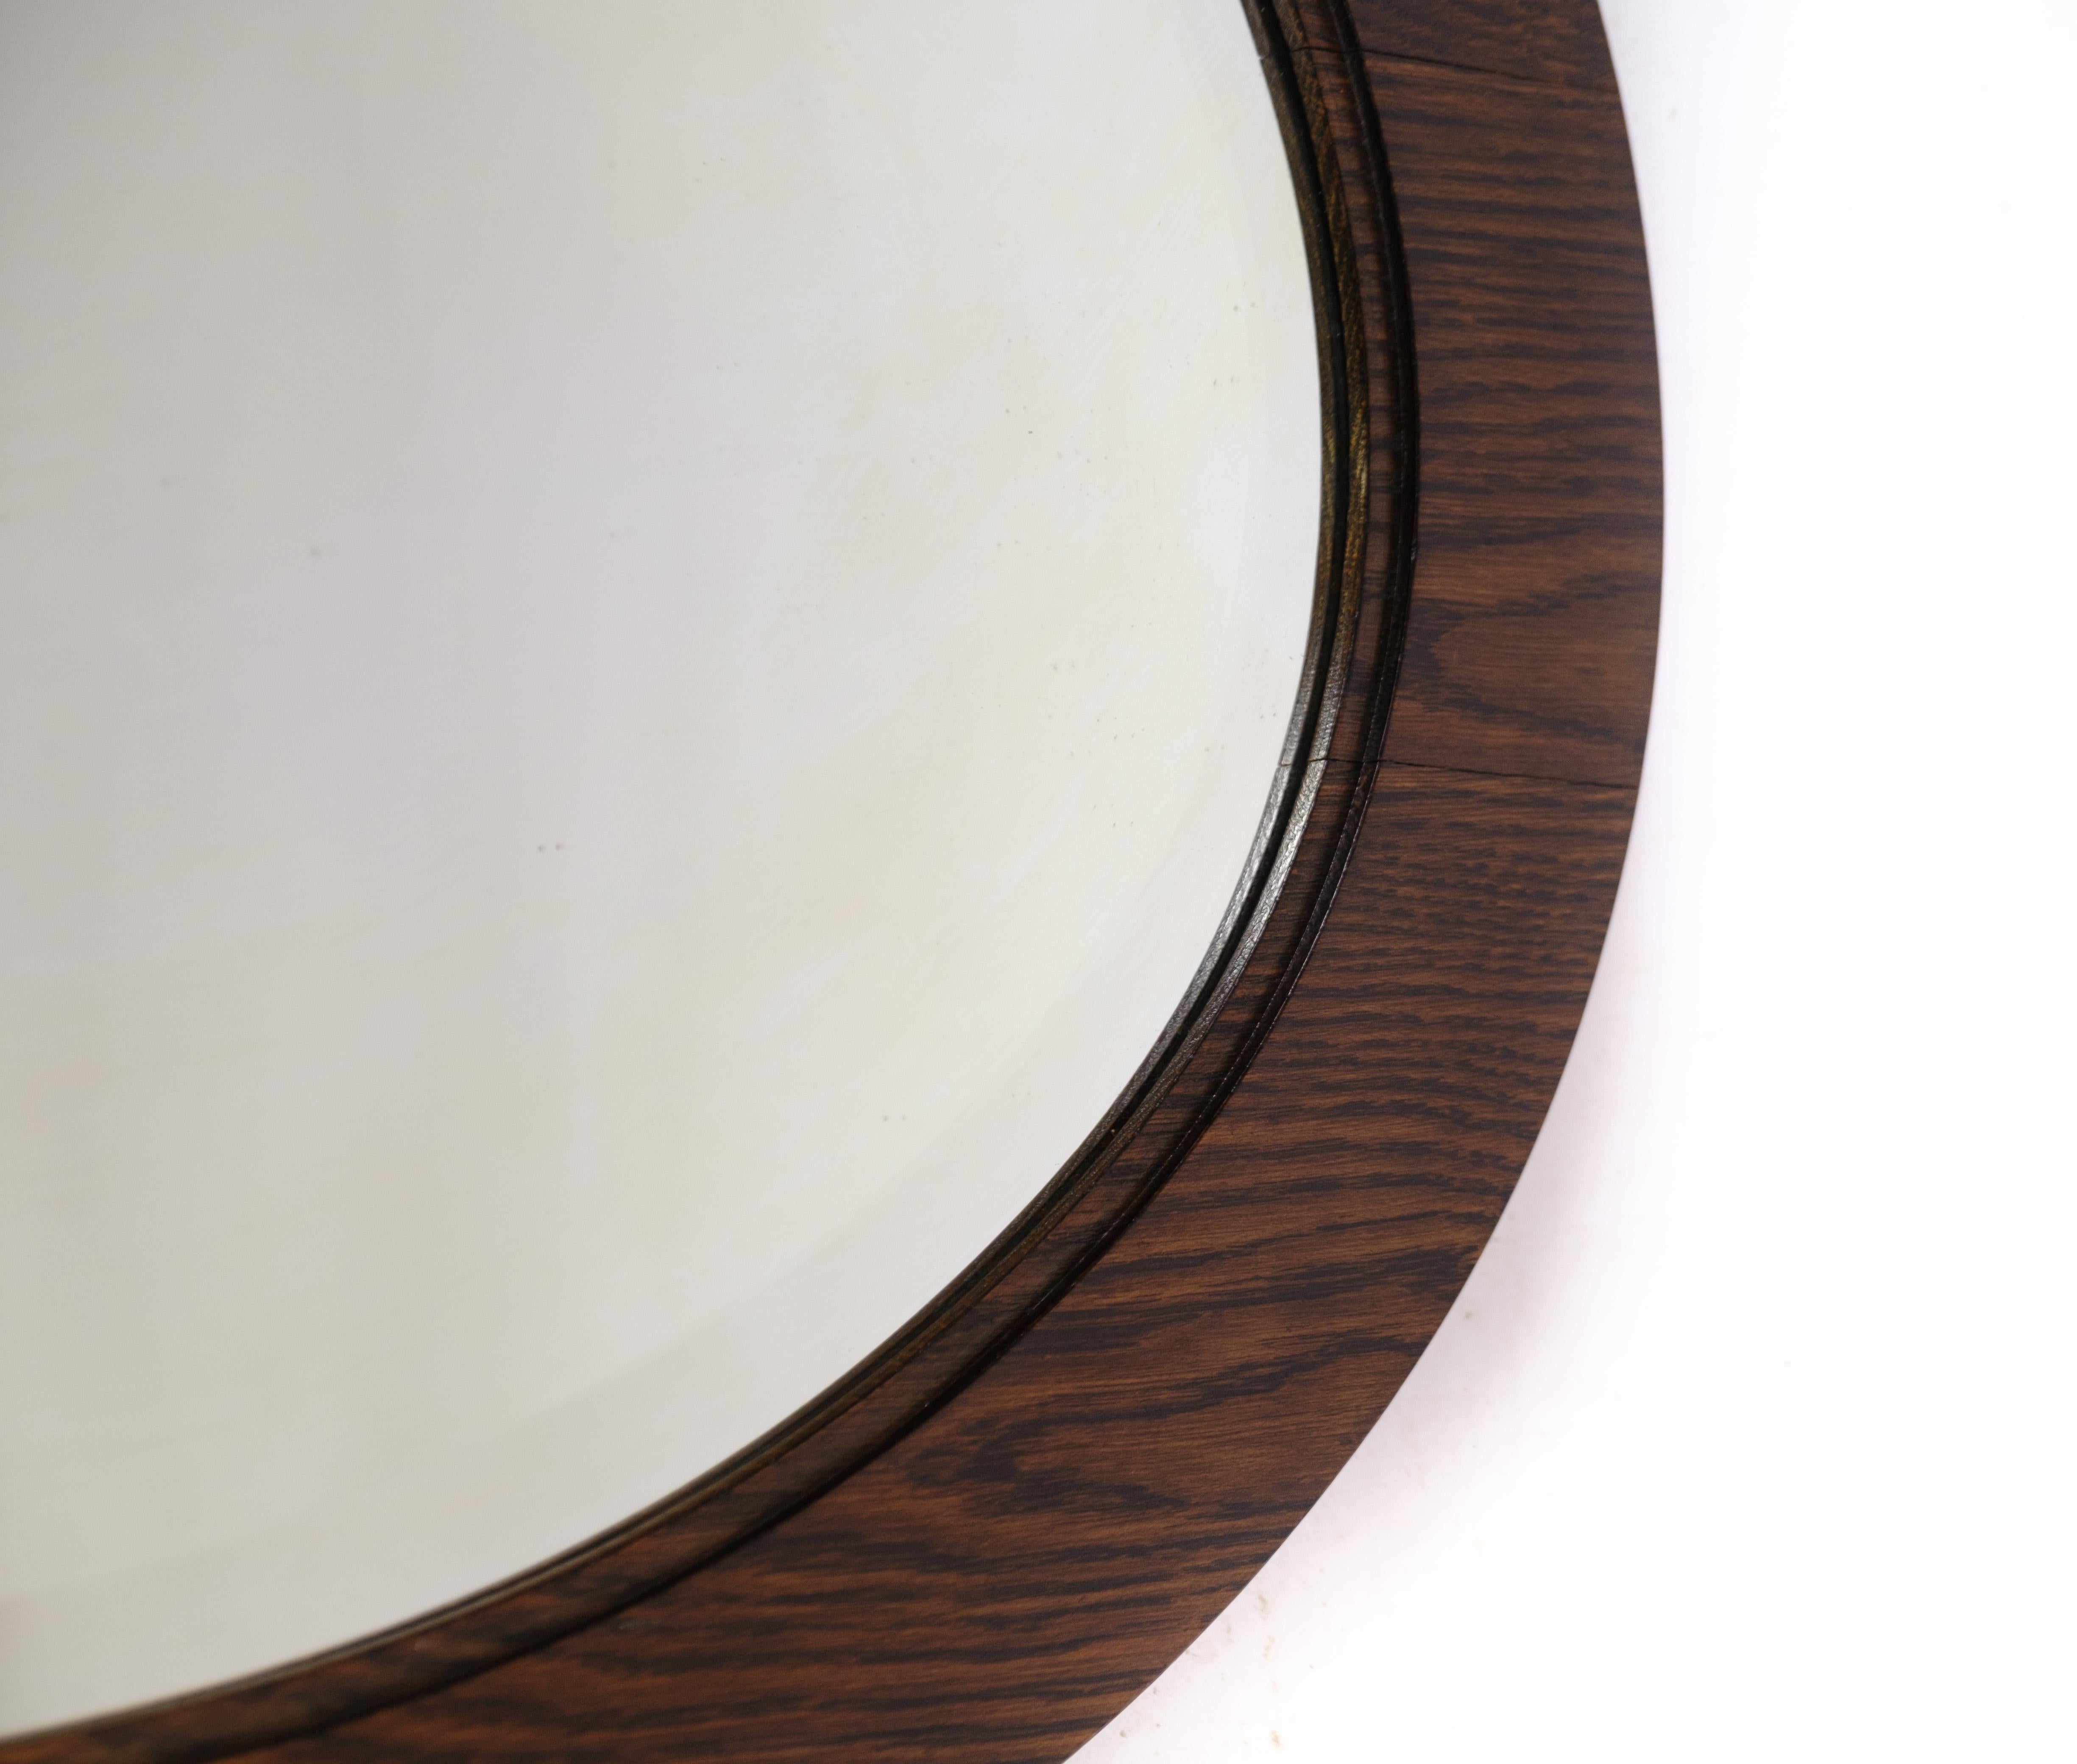 Antique oval mirror in dark stained oak from around the 1910s.
Dimensions in cm: H:74 W:103.